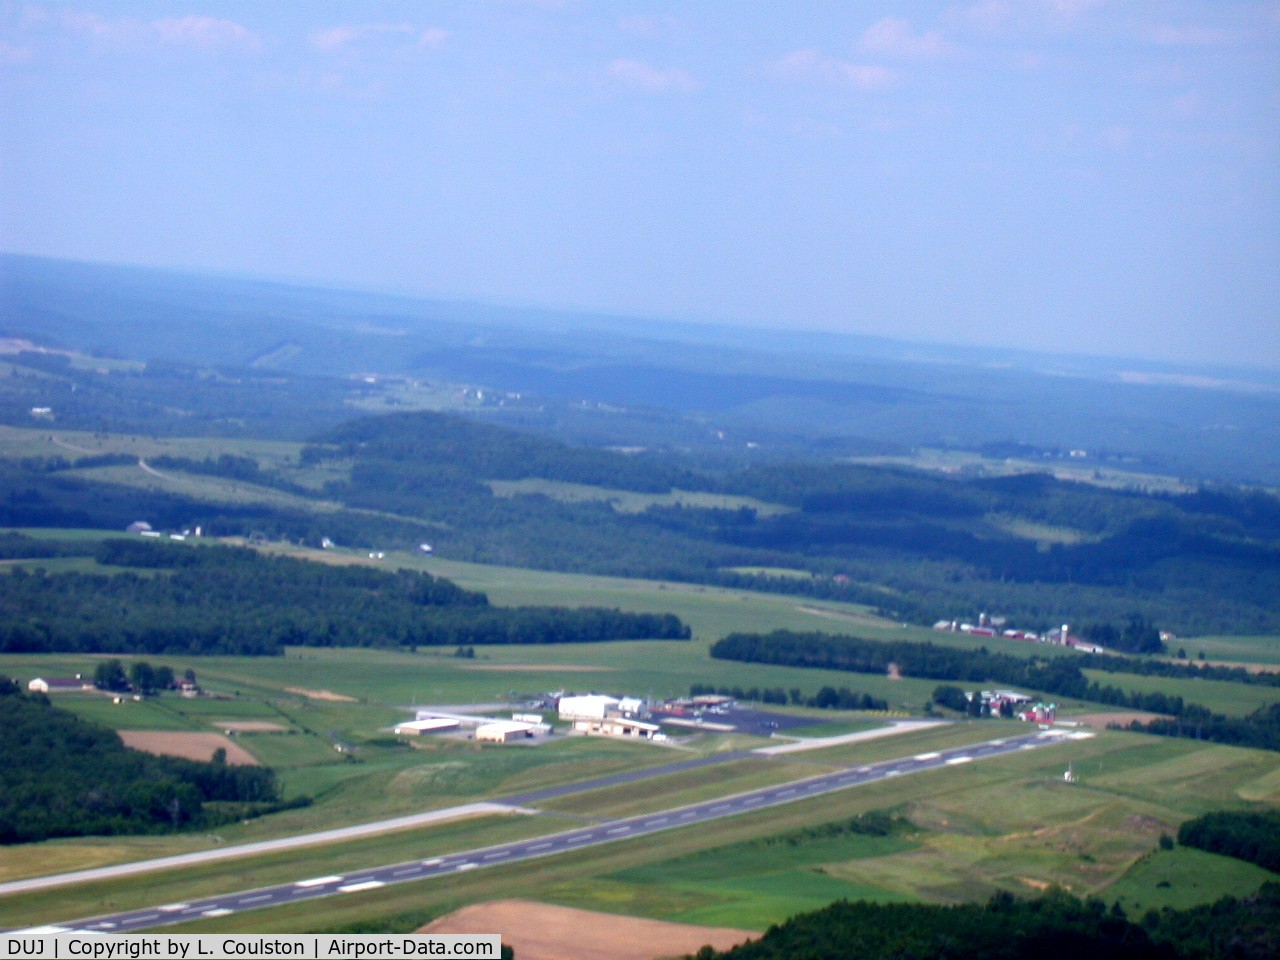 Dubois Regional Airport (DUJ) - Dubois, departing to south in C172